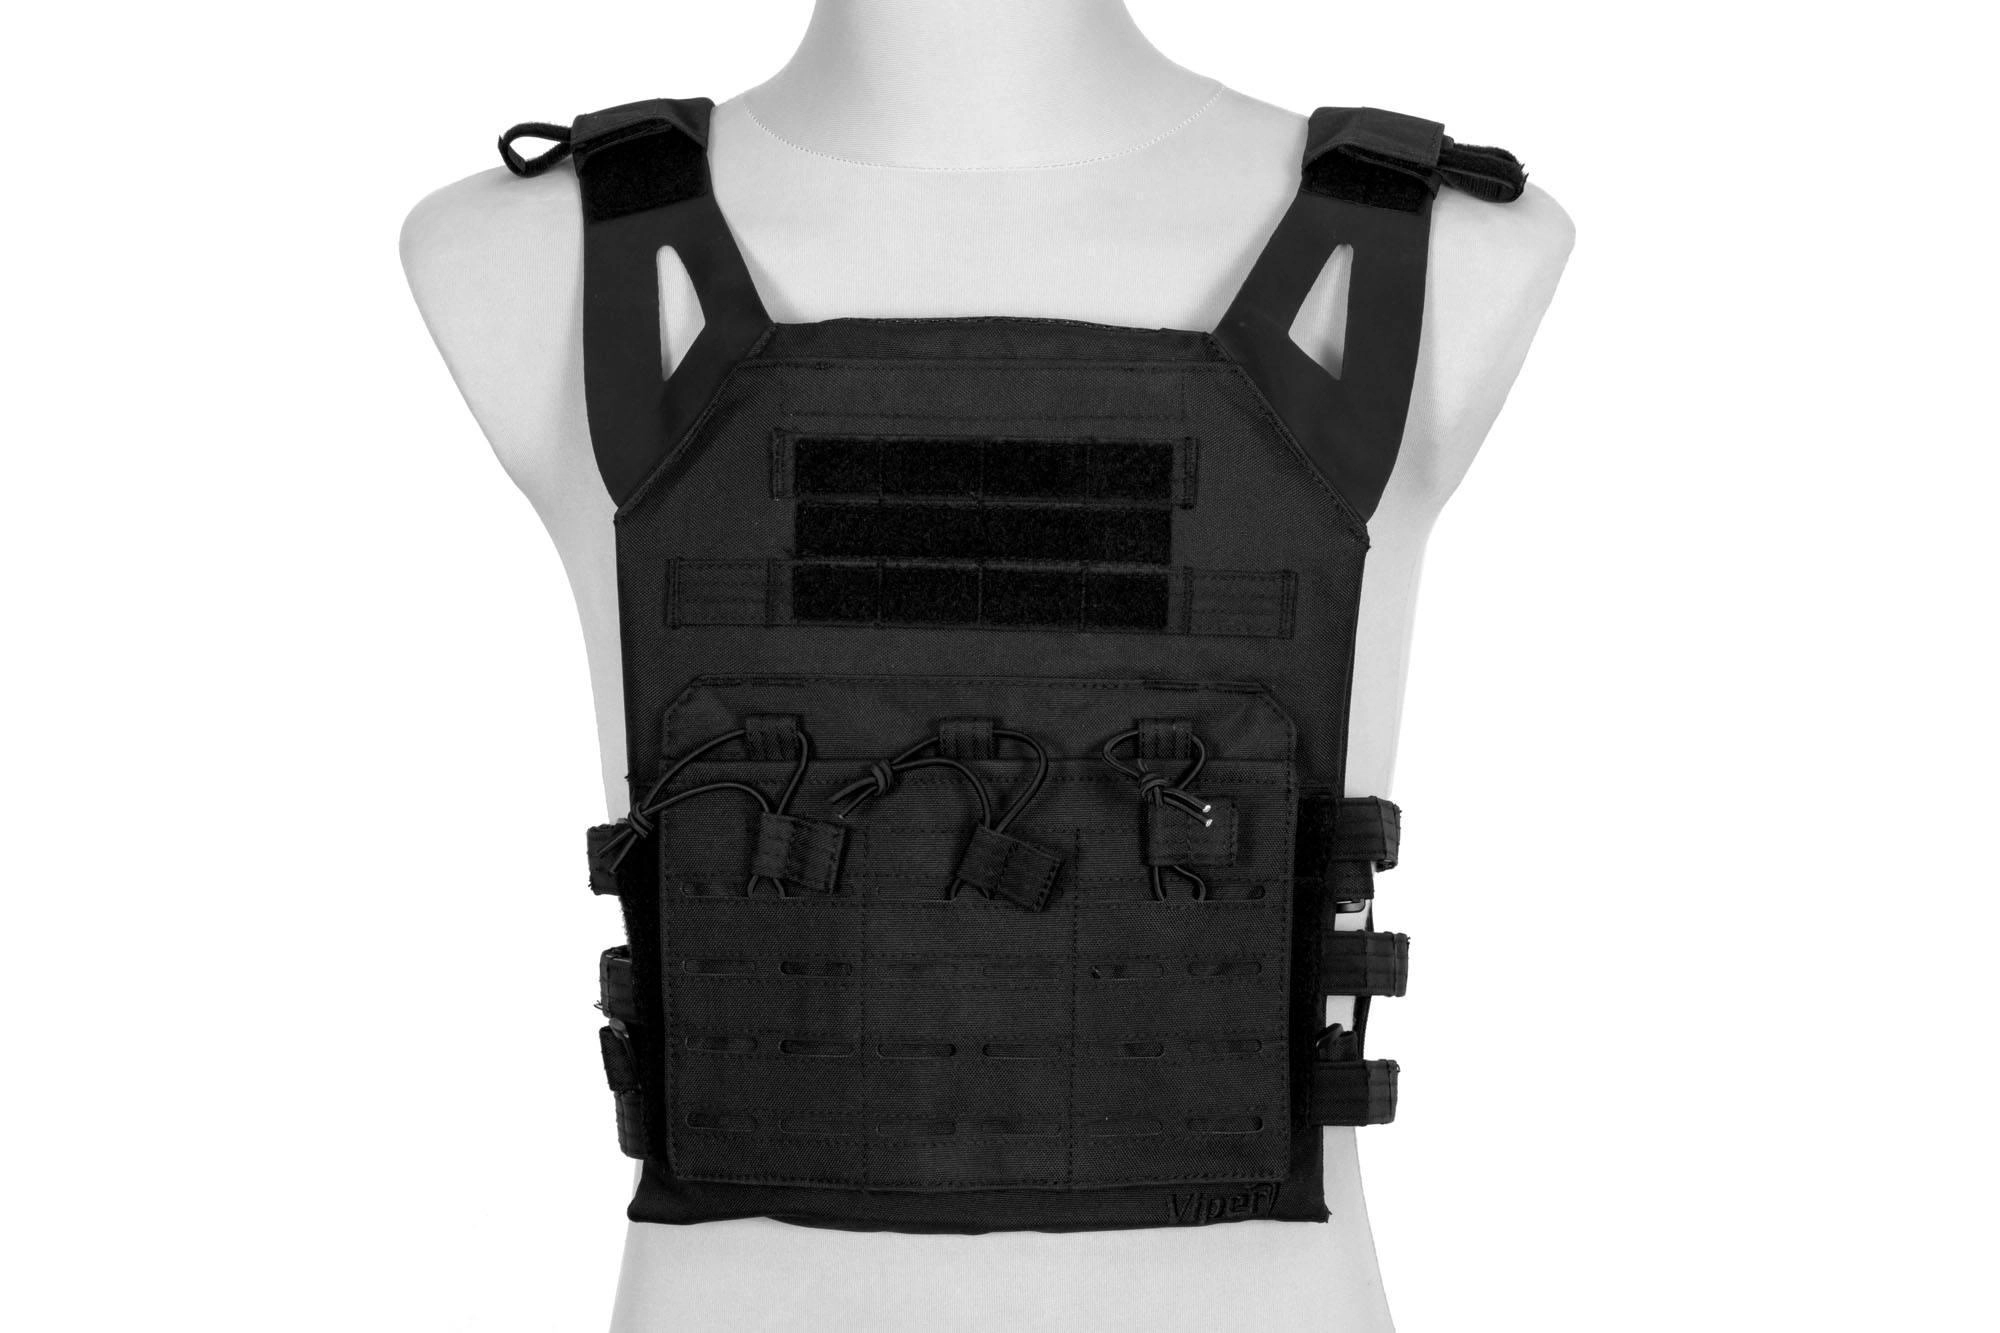 Viper Tactical Lazer Special Ops Plate Carrier - musta